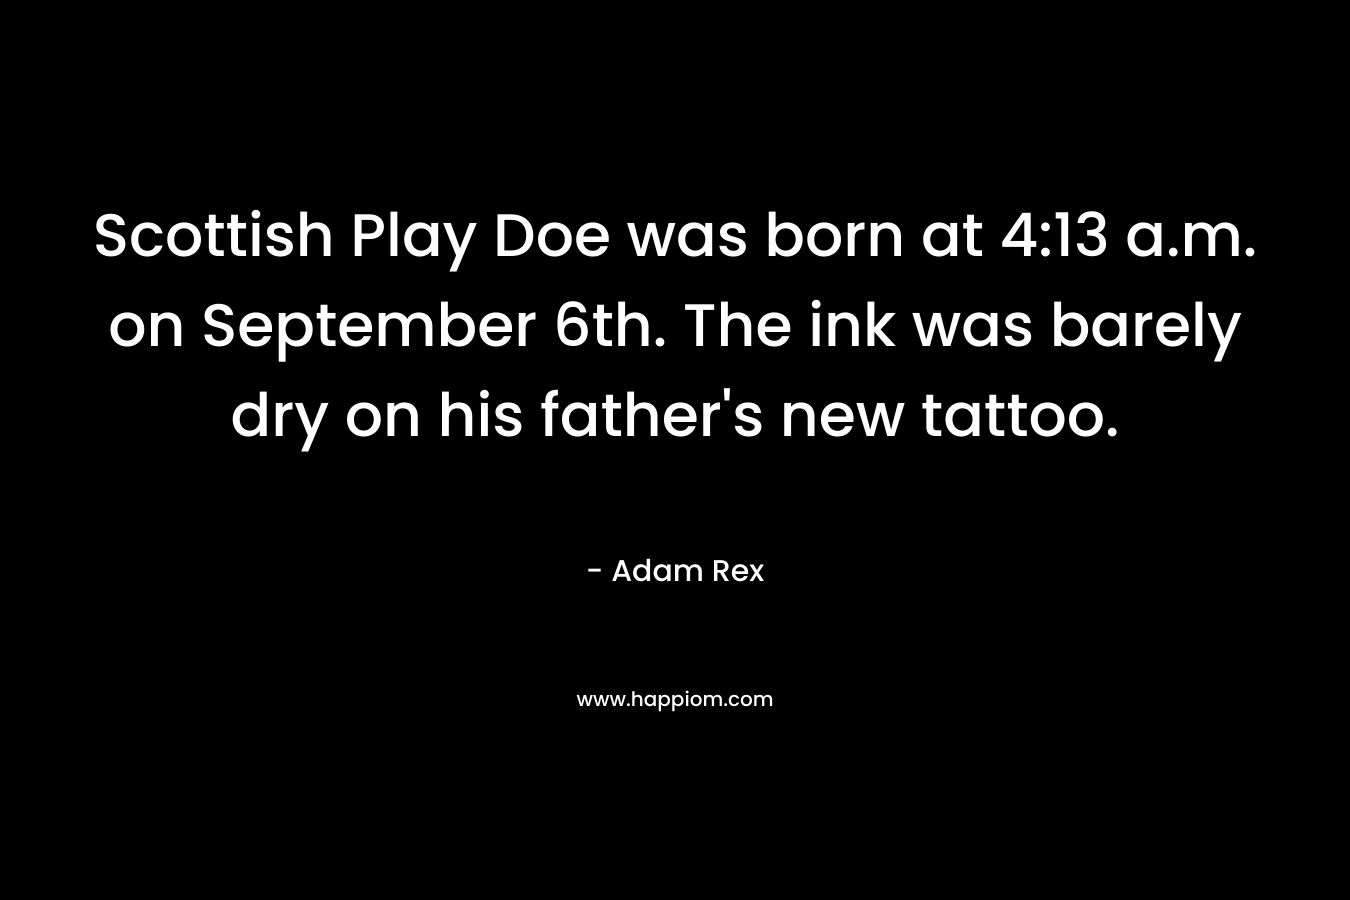 Scottish Play Doe was born at 4:13 a.m. on September 6th. The ink was barely dry on his father’s new tattoo. – Adam Rex